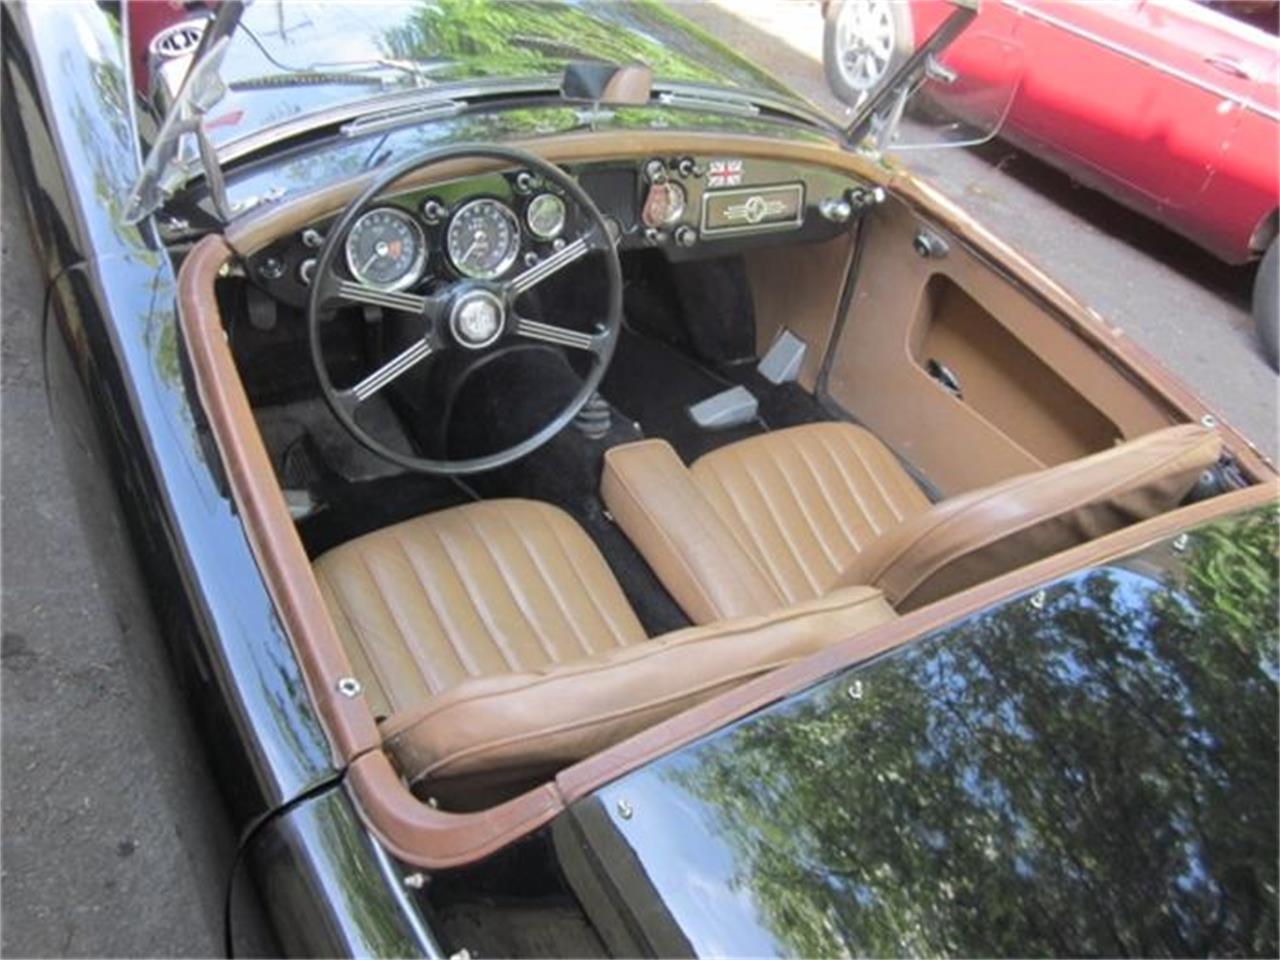 1959 MG MGA 1500 for sale in Stratford, CT – photo 4